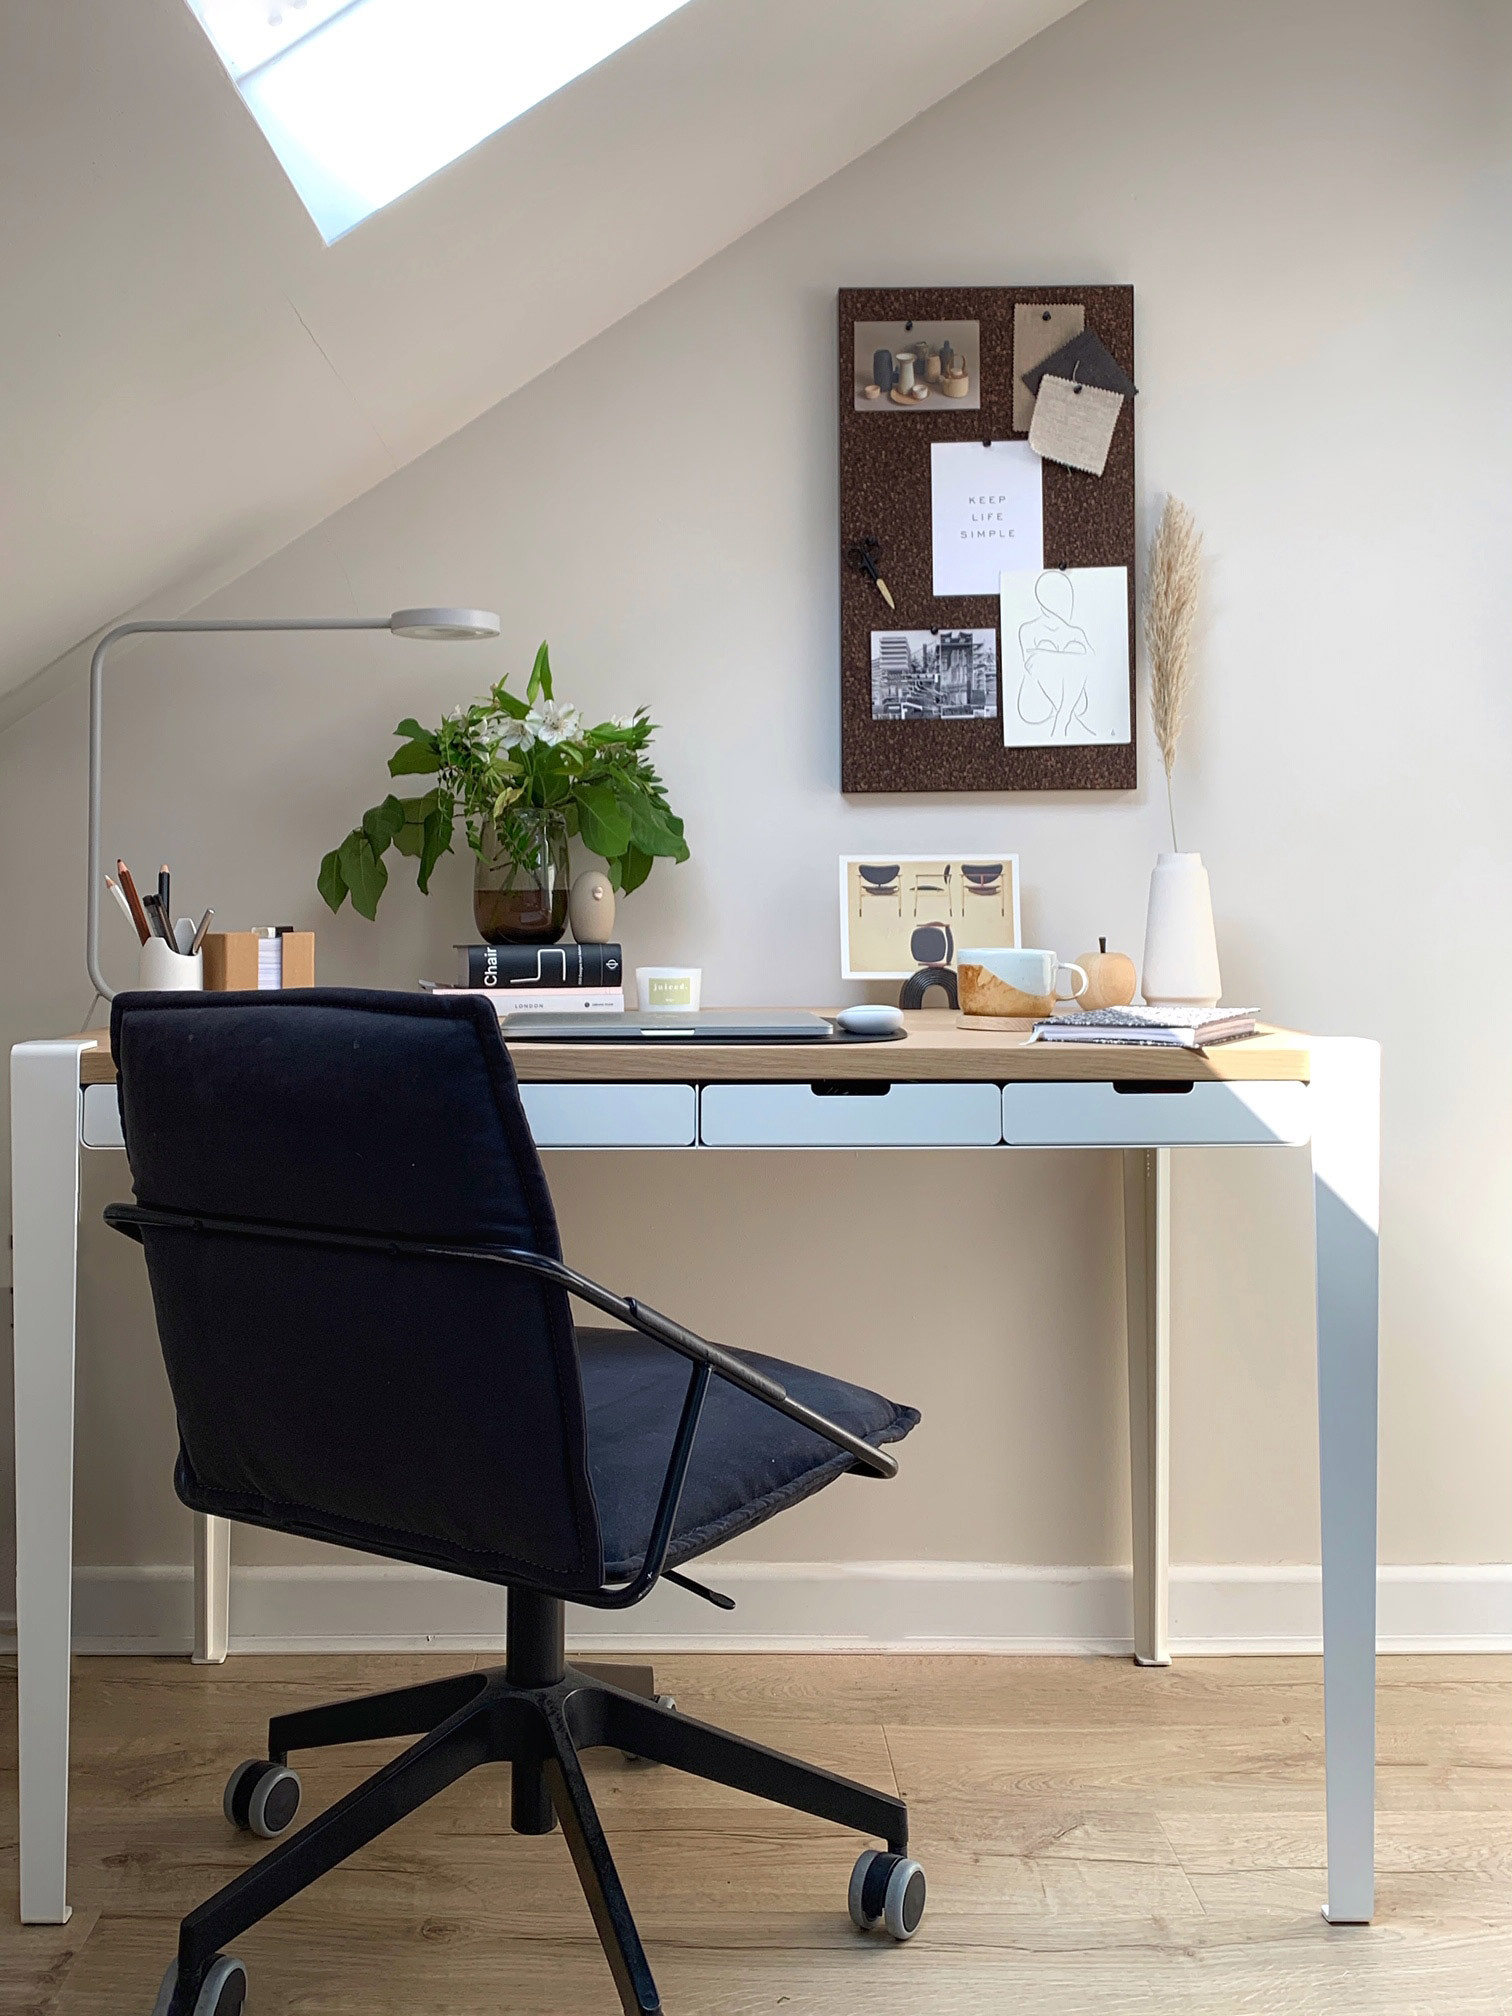 How to Choose the Best Desk Size for Your Workspace